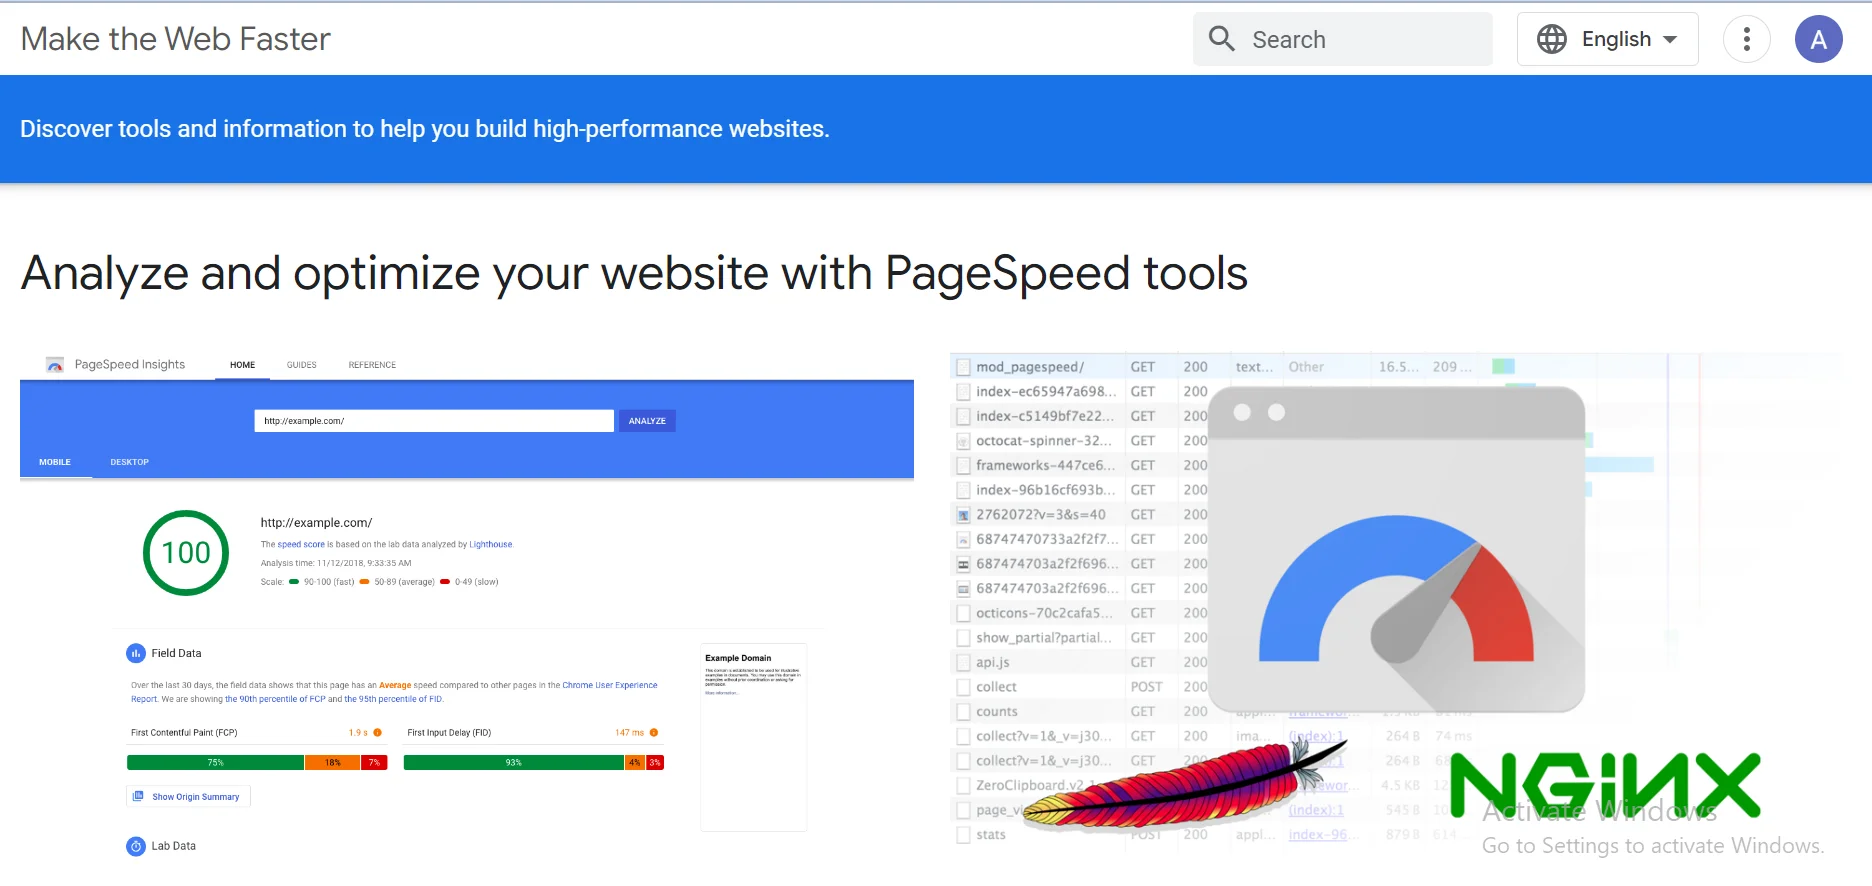 Homepage of Google PageSpeed Insights